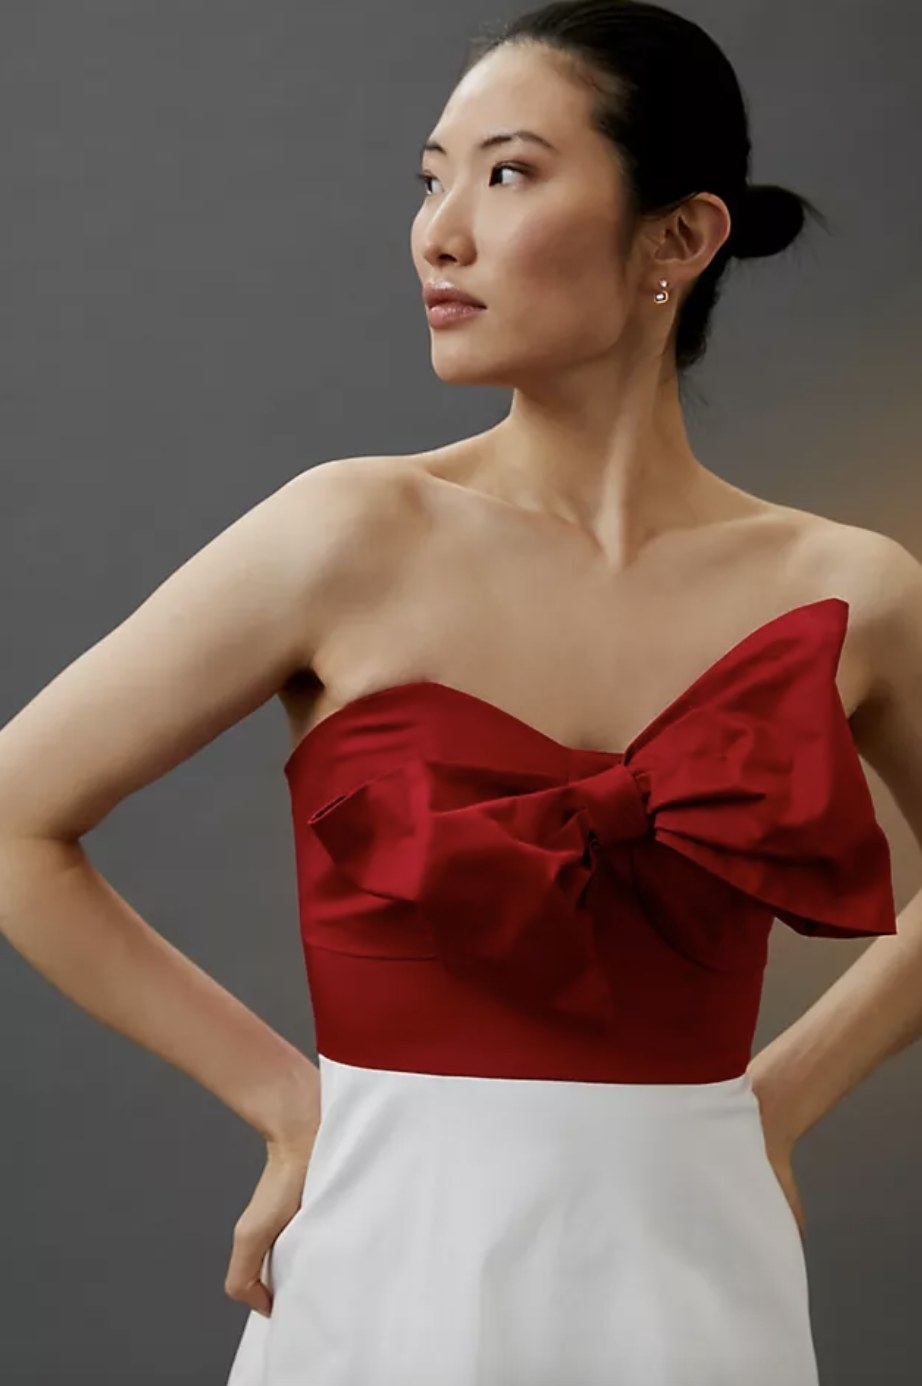 An adult wears a red top with a large bow and a white skirt